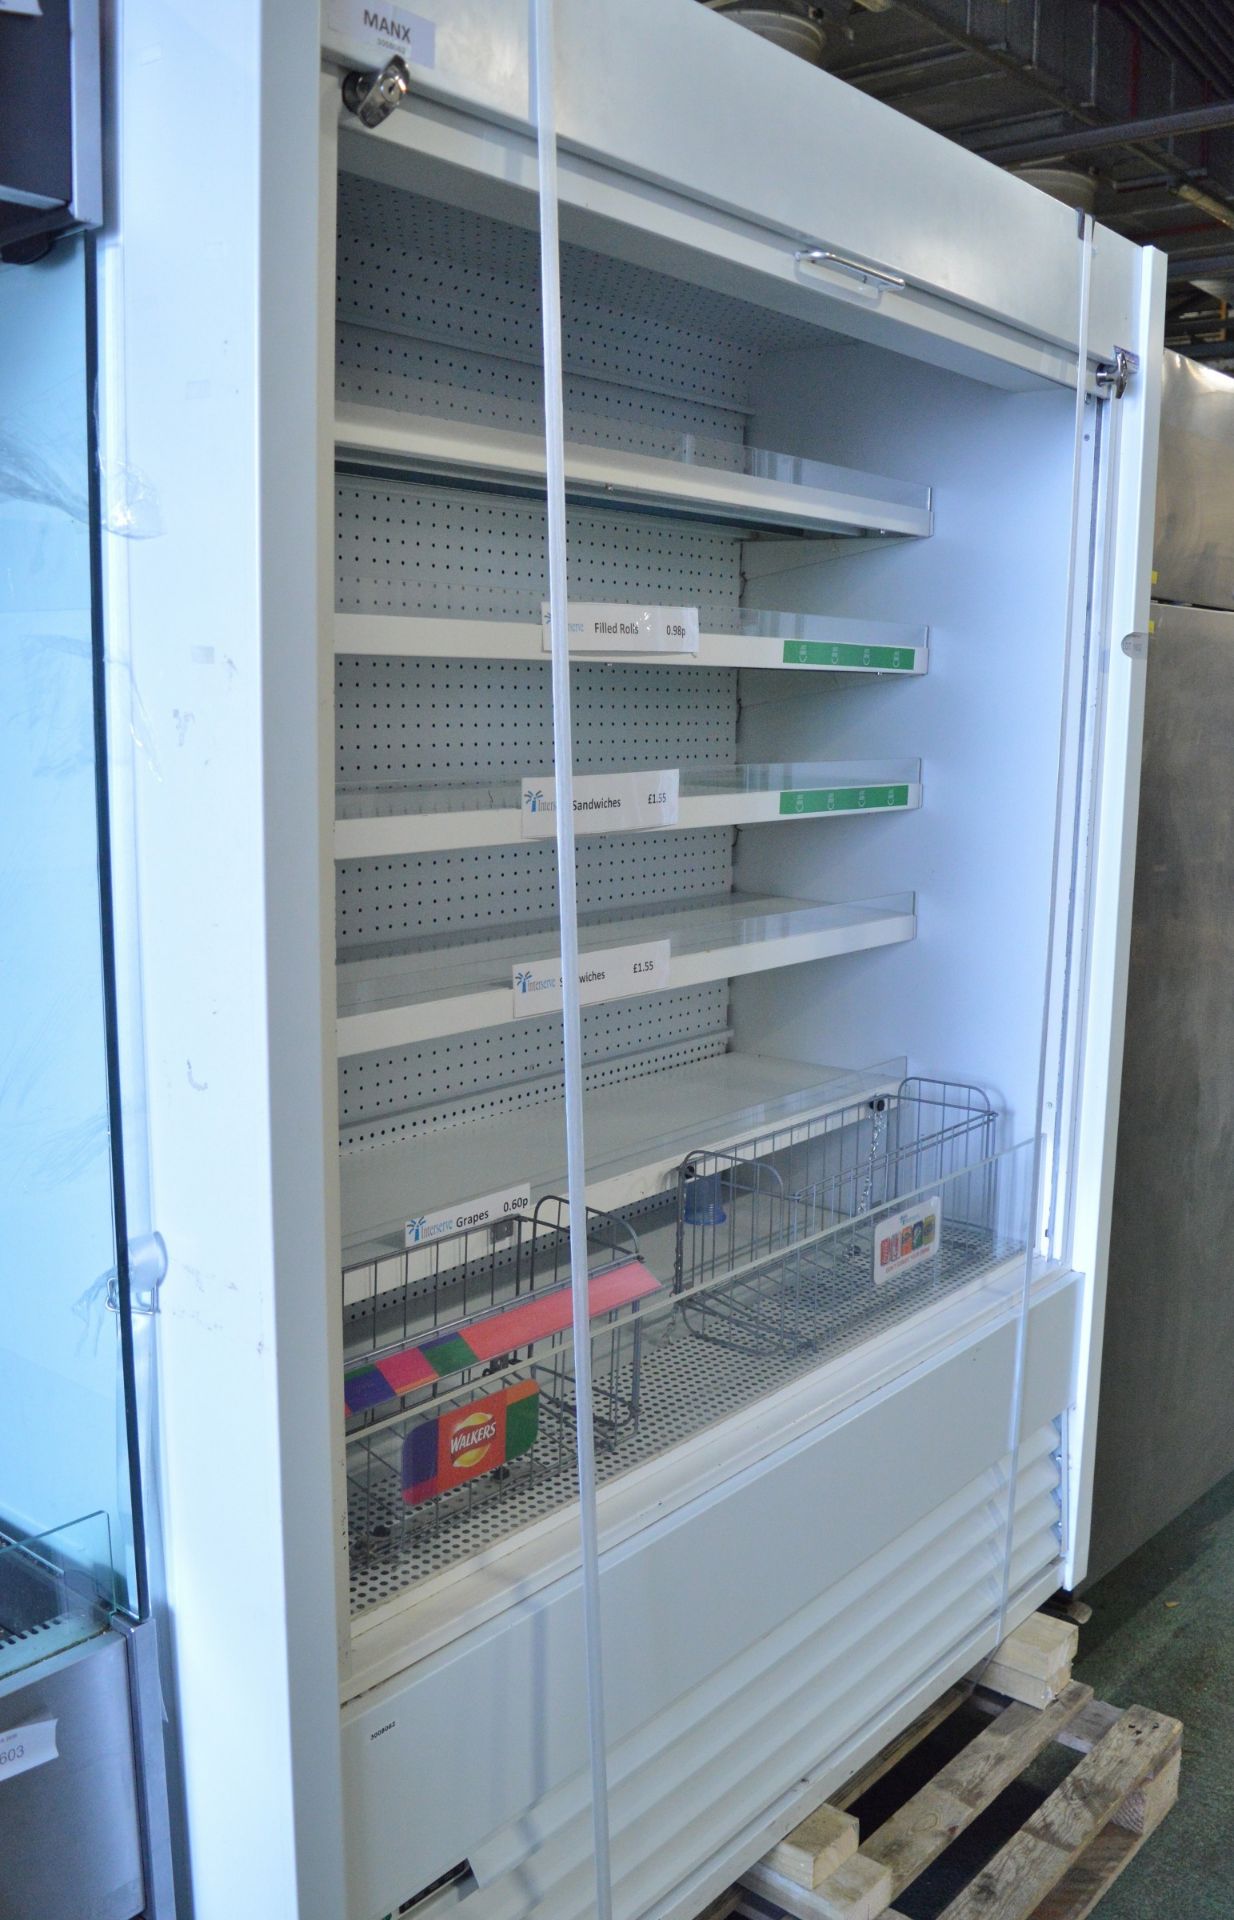 SZA20530-ScanFrost Refrigerated Display Cabinet - L1500 x W760 x H1900mm - Image 5 of 5